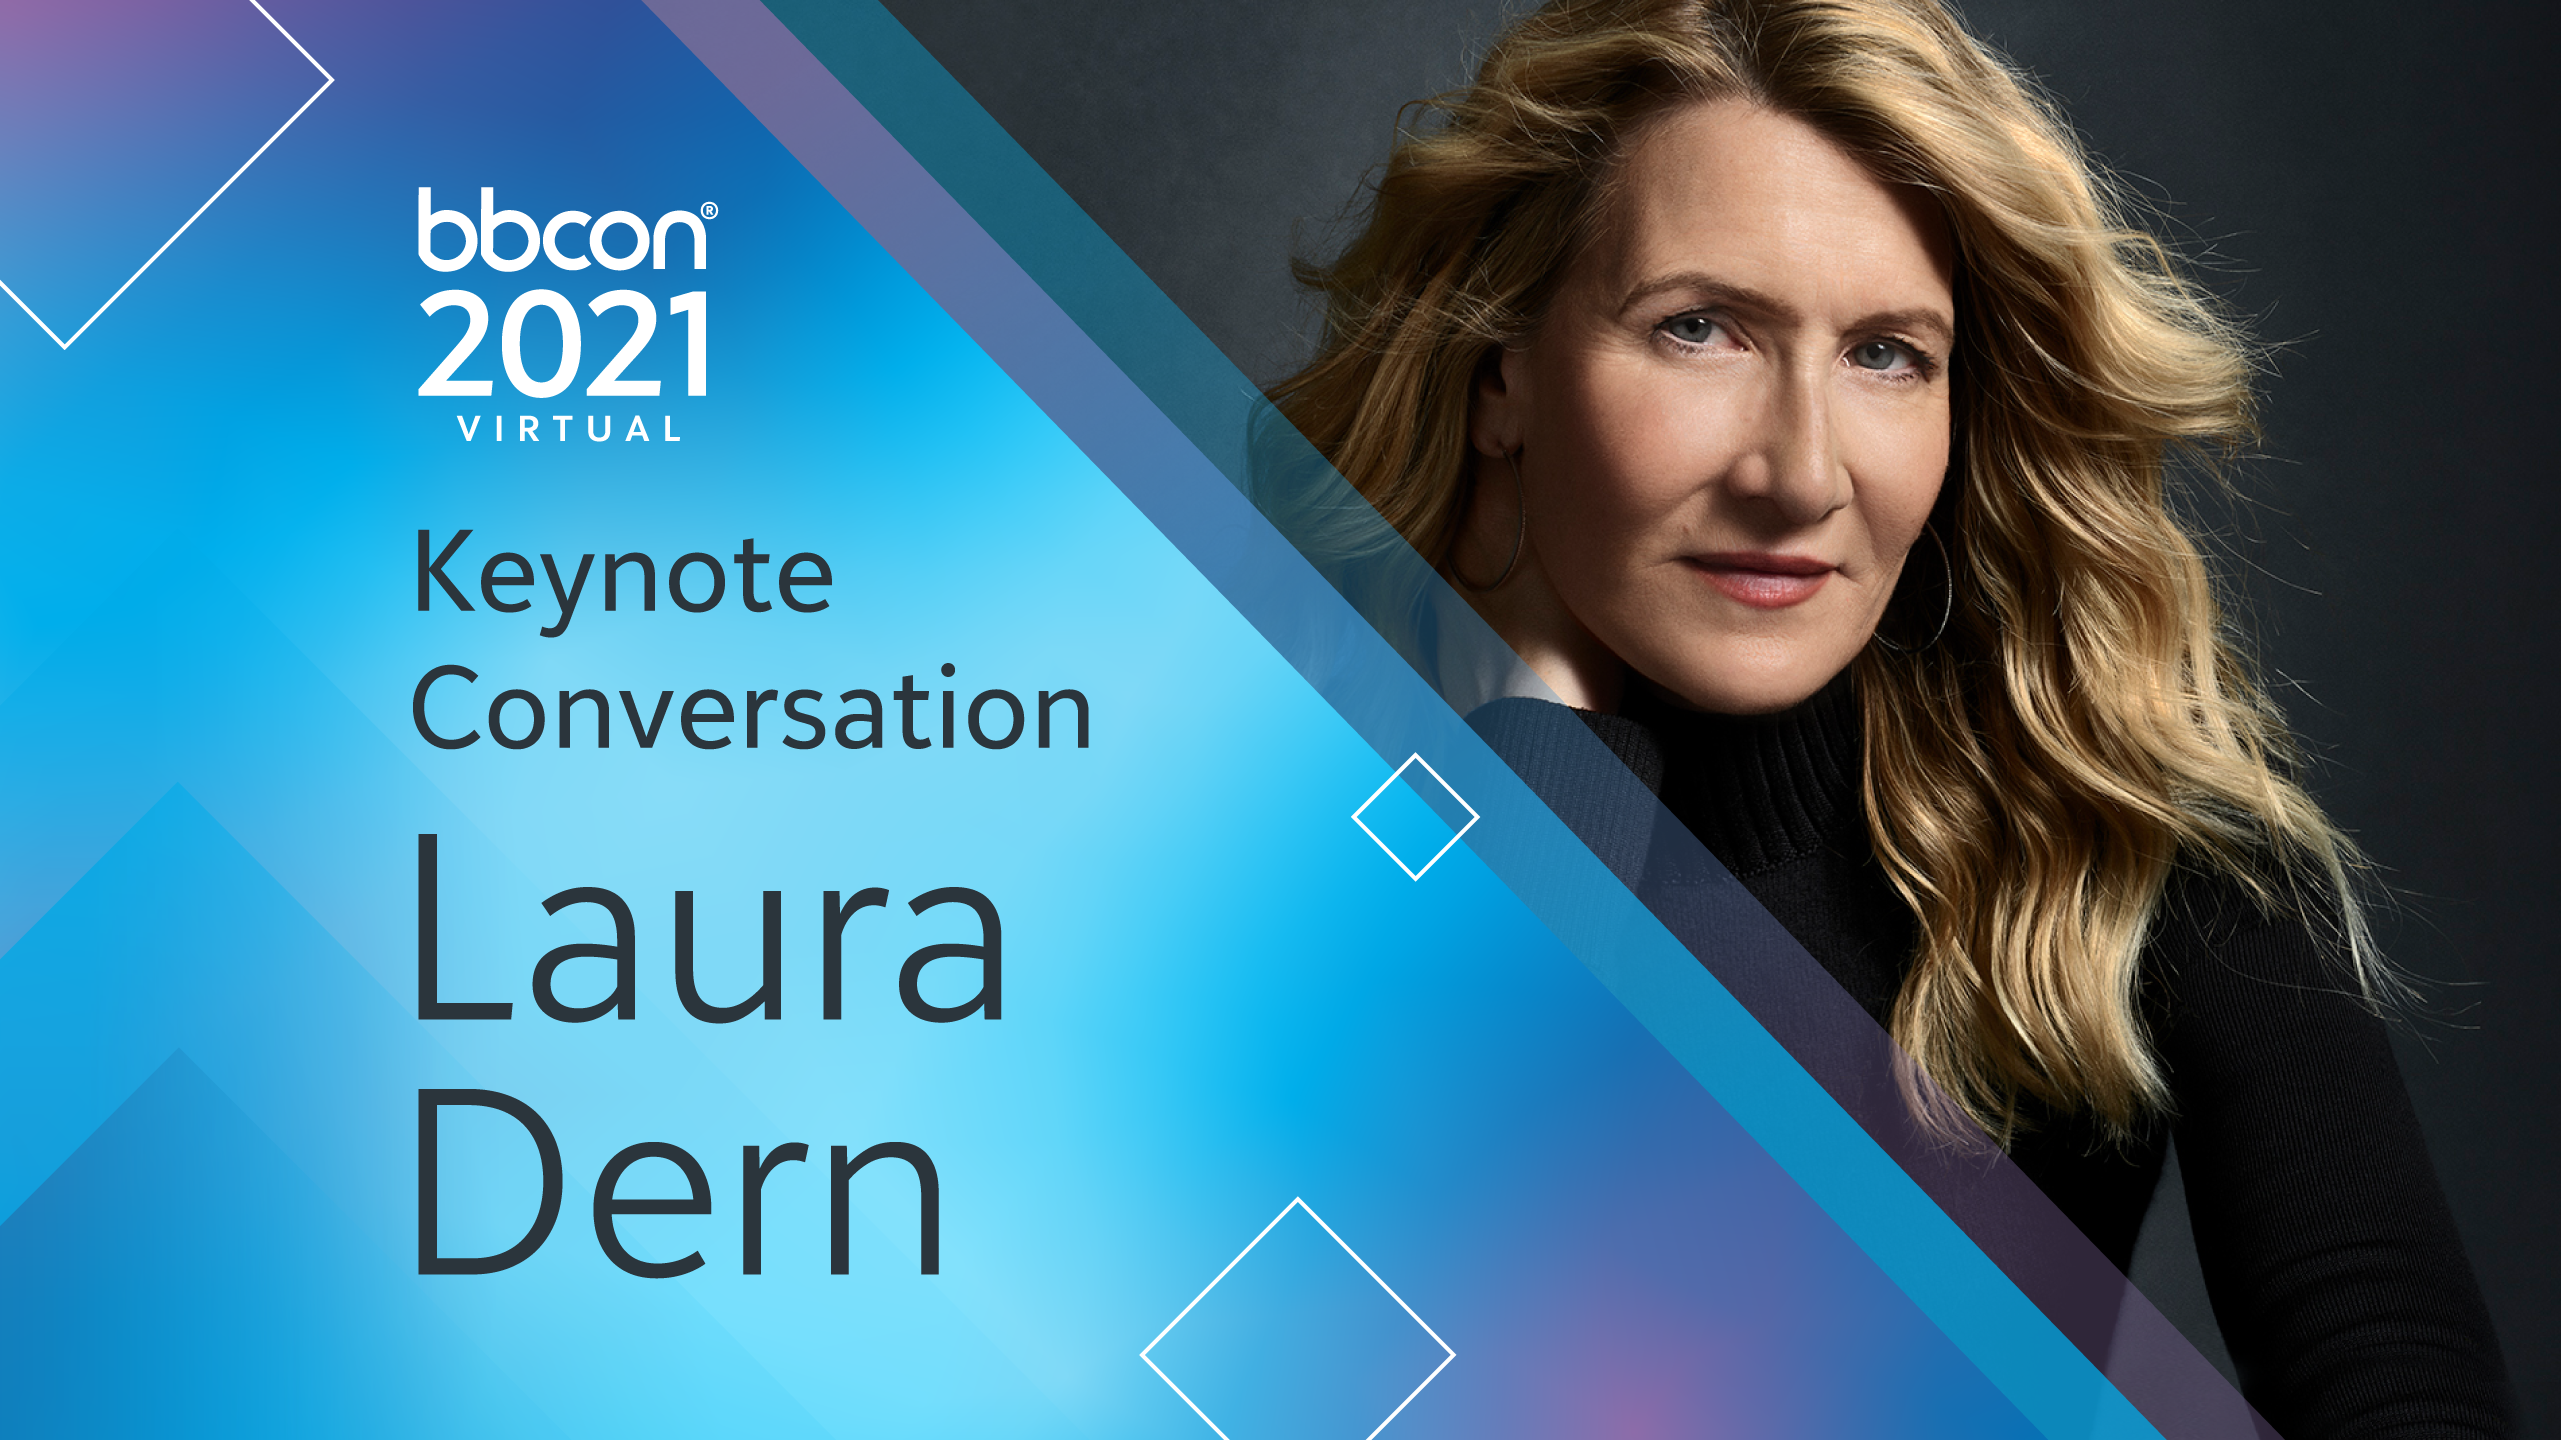 Big News: Laura Dern To Join The bbcon 2021 Virtual Mainstage! 7792